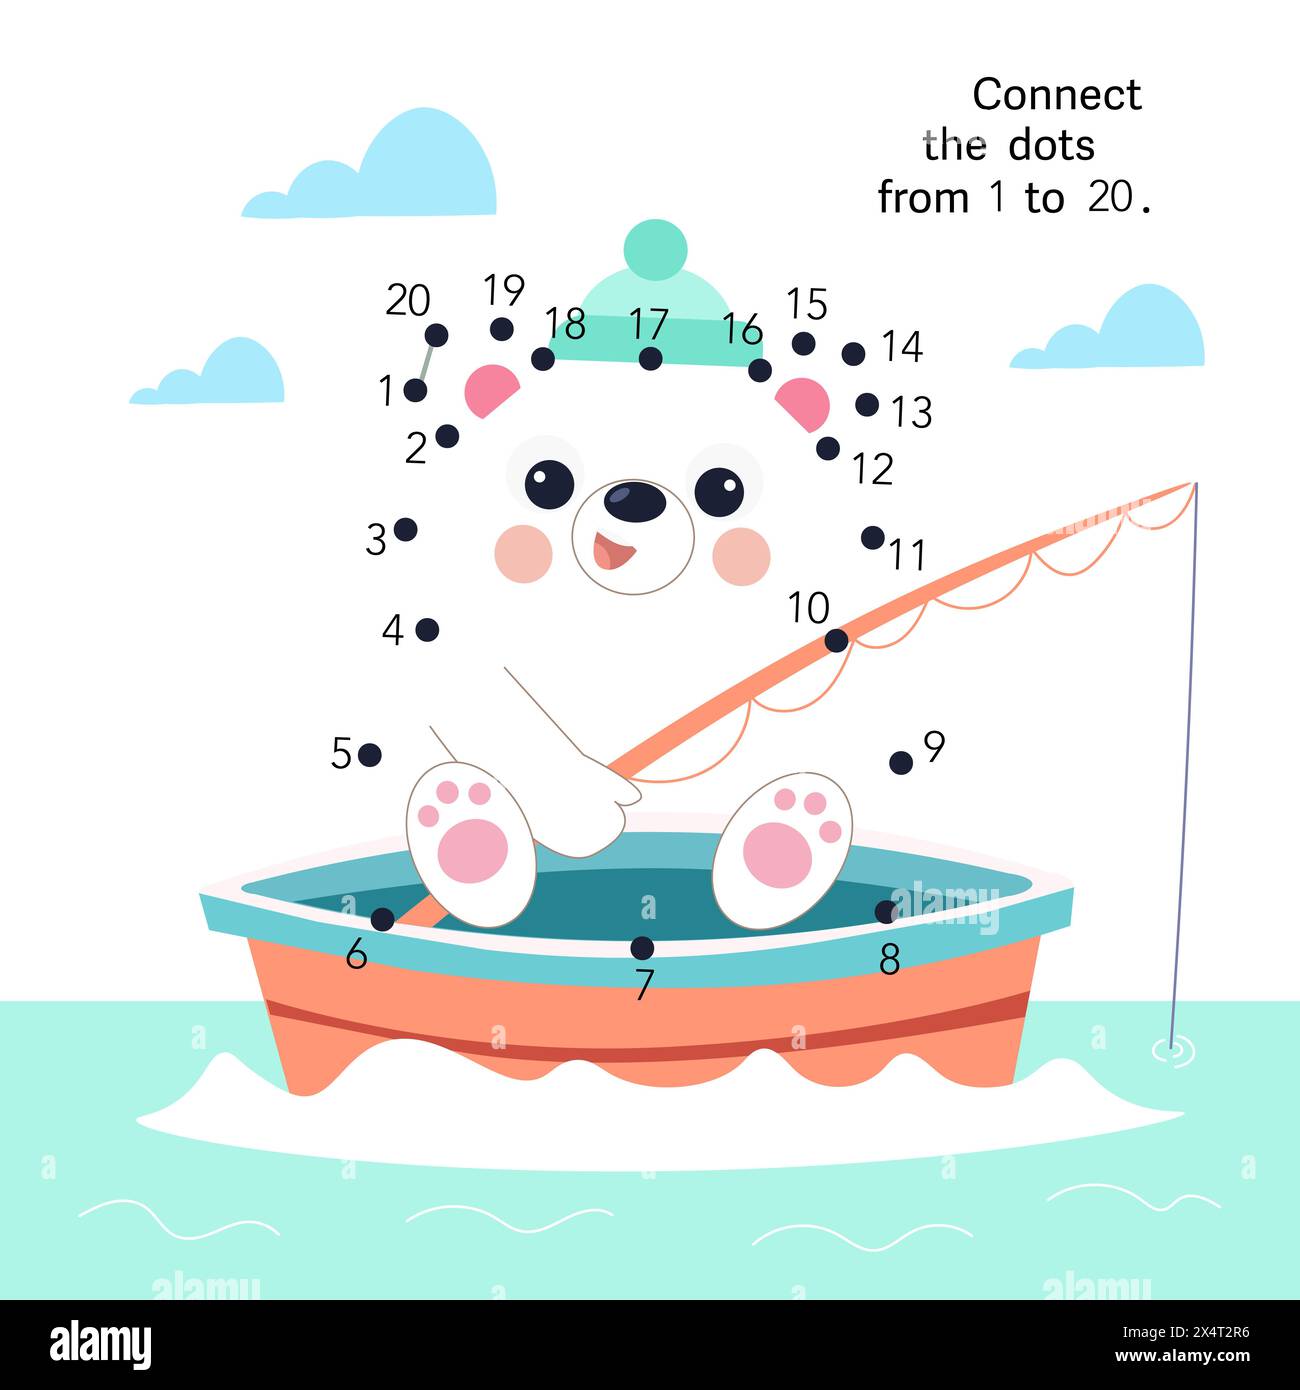 Dot to dot. Connect the dots from 1 to 20. Puzzle game for children. Cute bear in boat. Vector illustration. Stock Vector